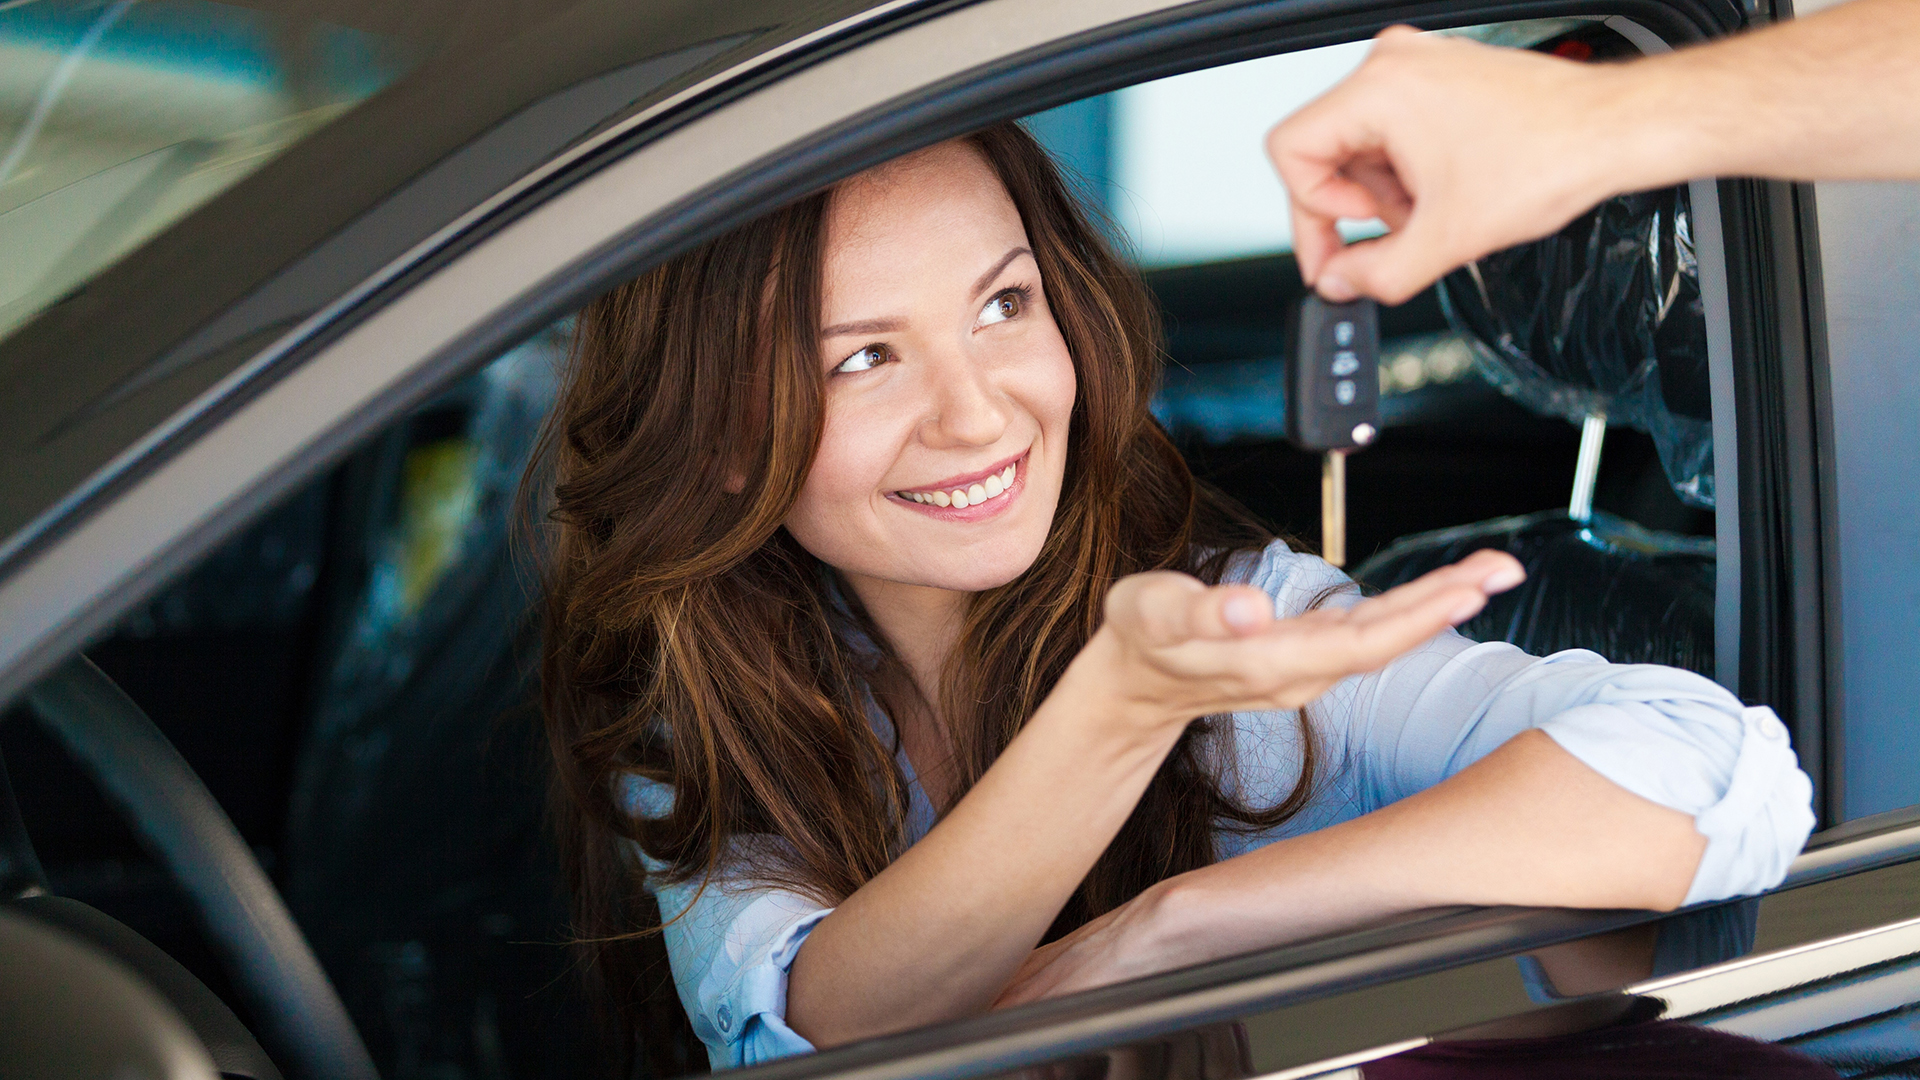 Eyes Here! – Get An Auto Loan By Following These Steps